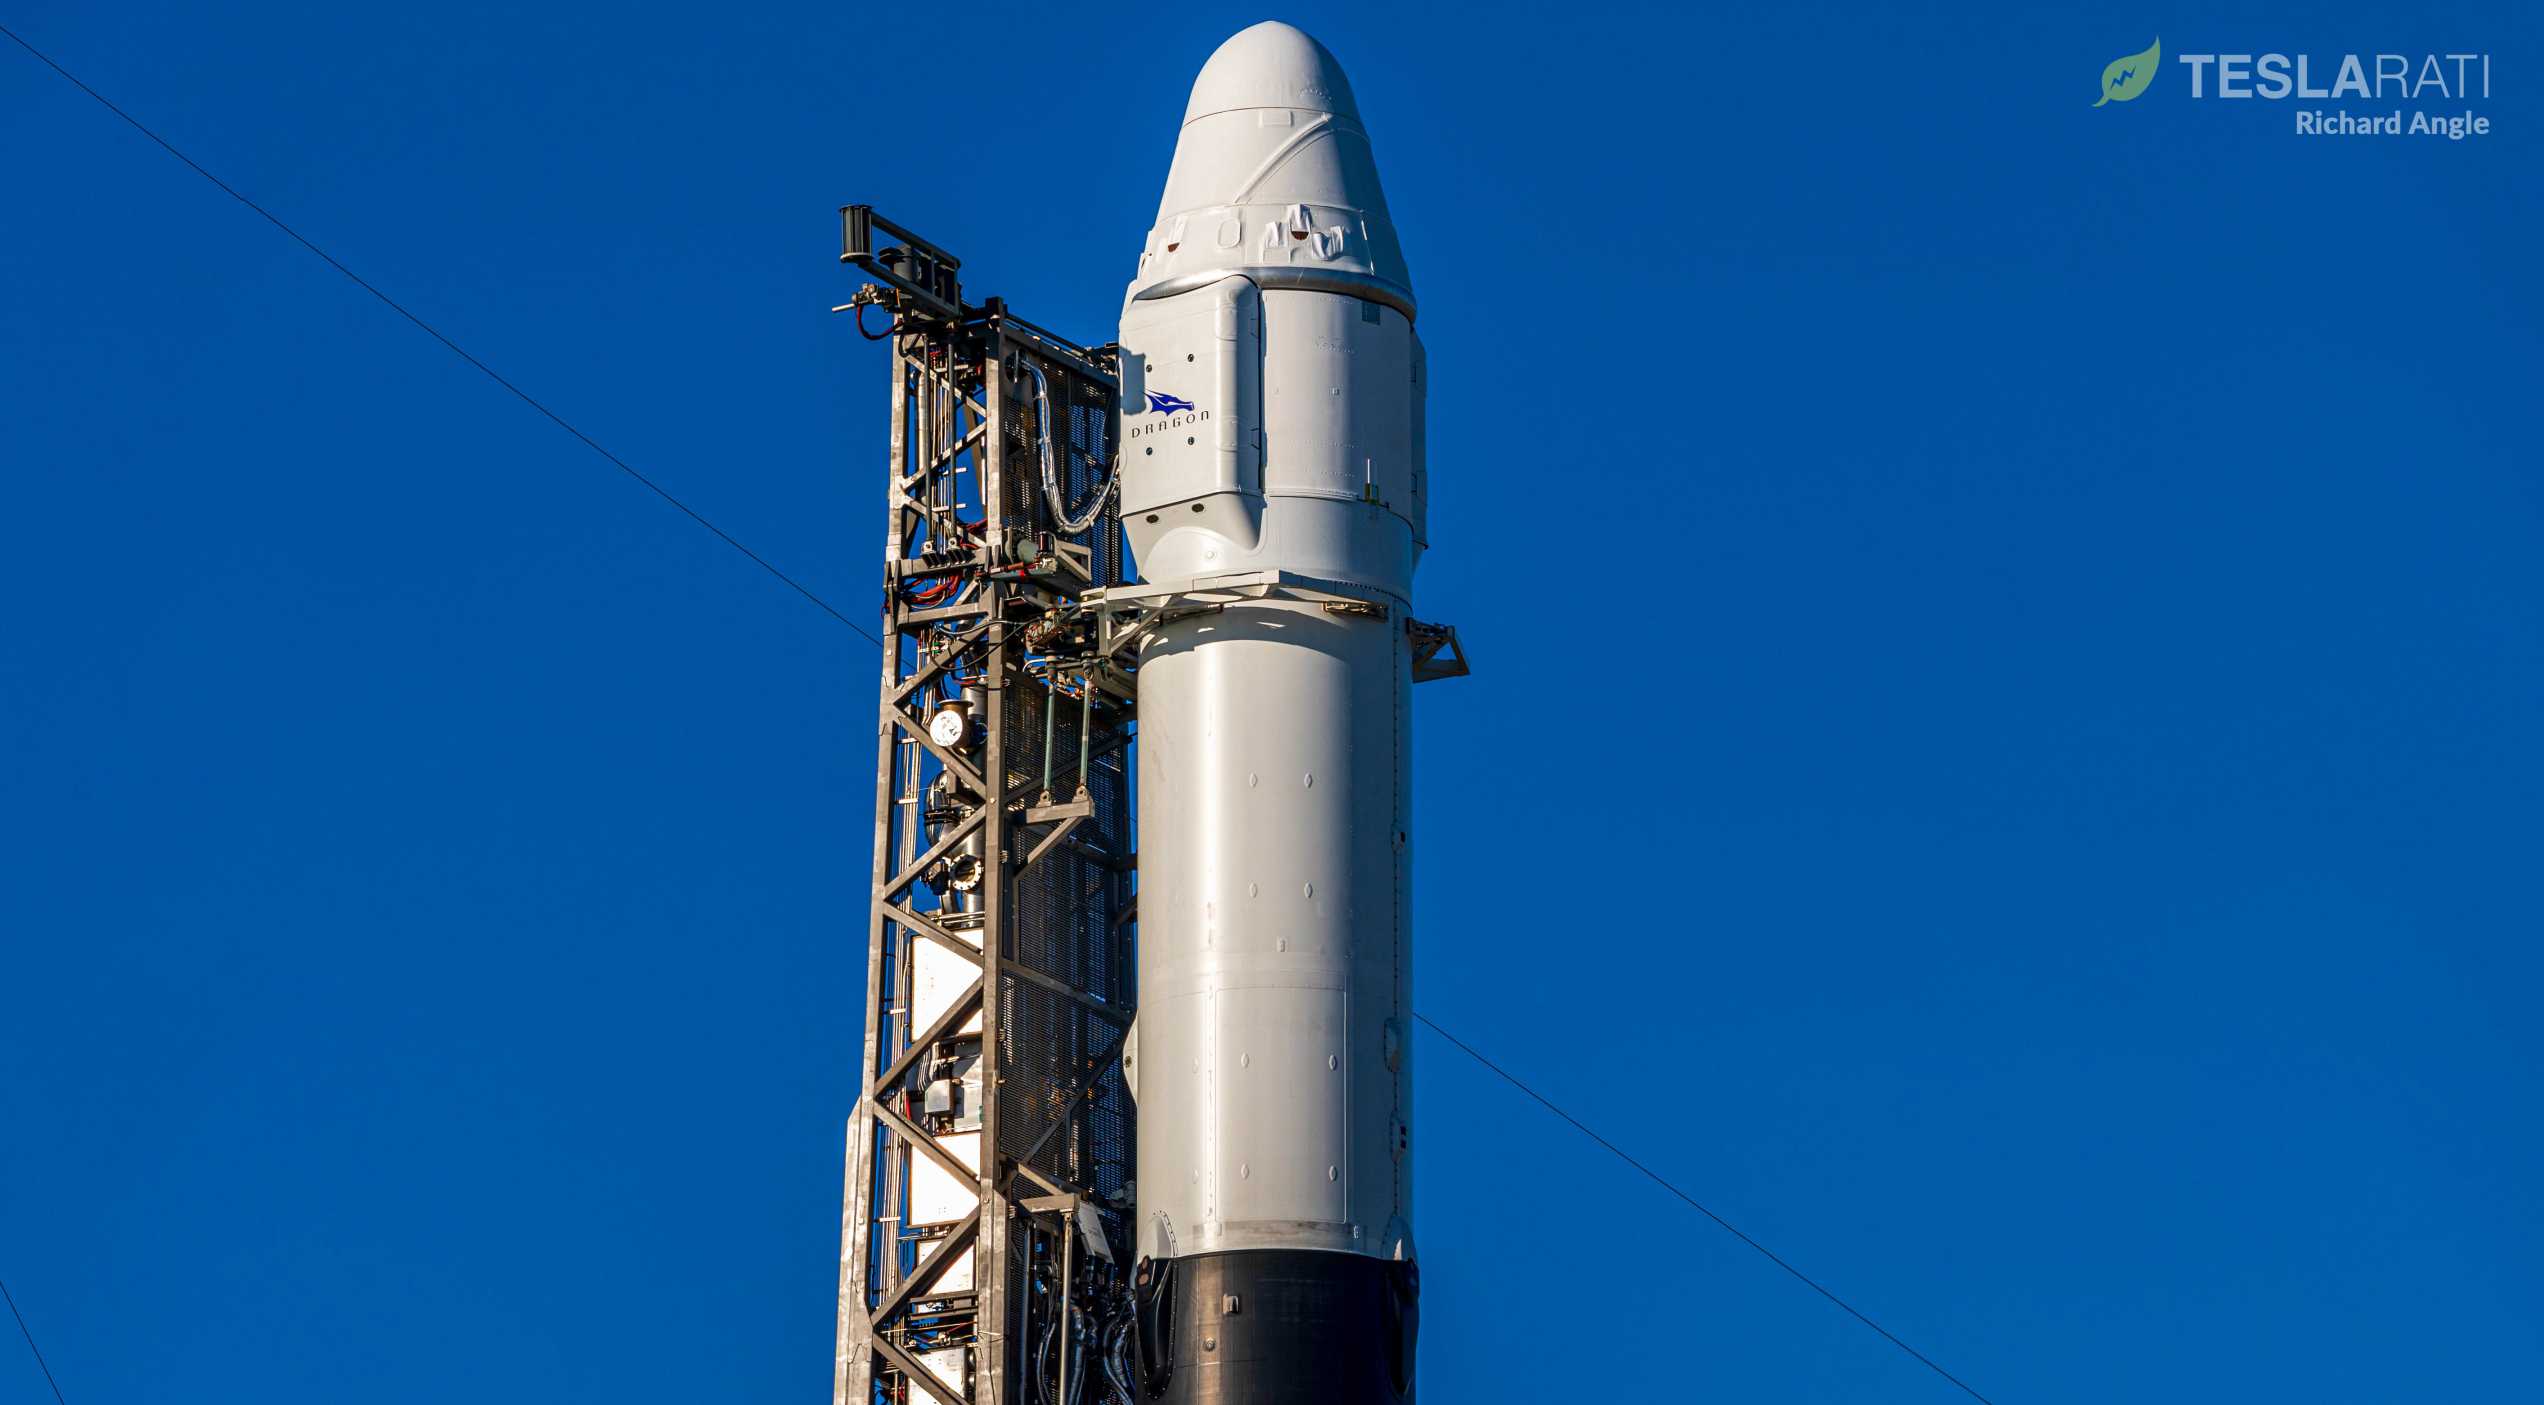 CRS-19 C106 Falcon 9 B1059 vertical LC-40 120419 (Richard Angle) (3) crop S2 (c)